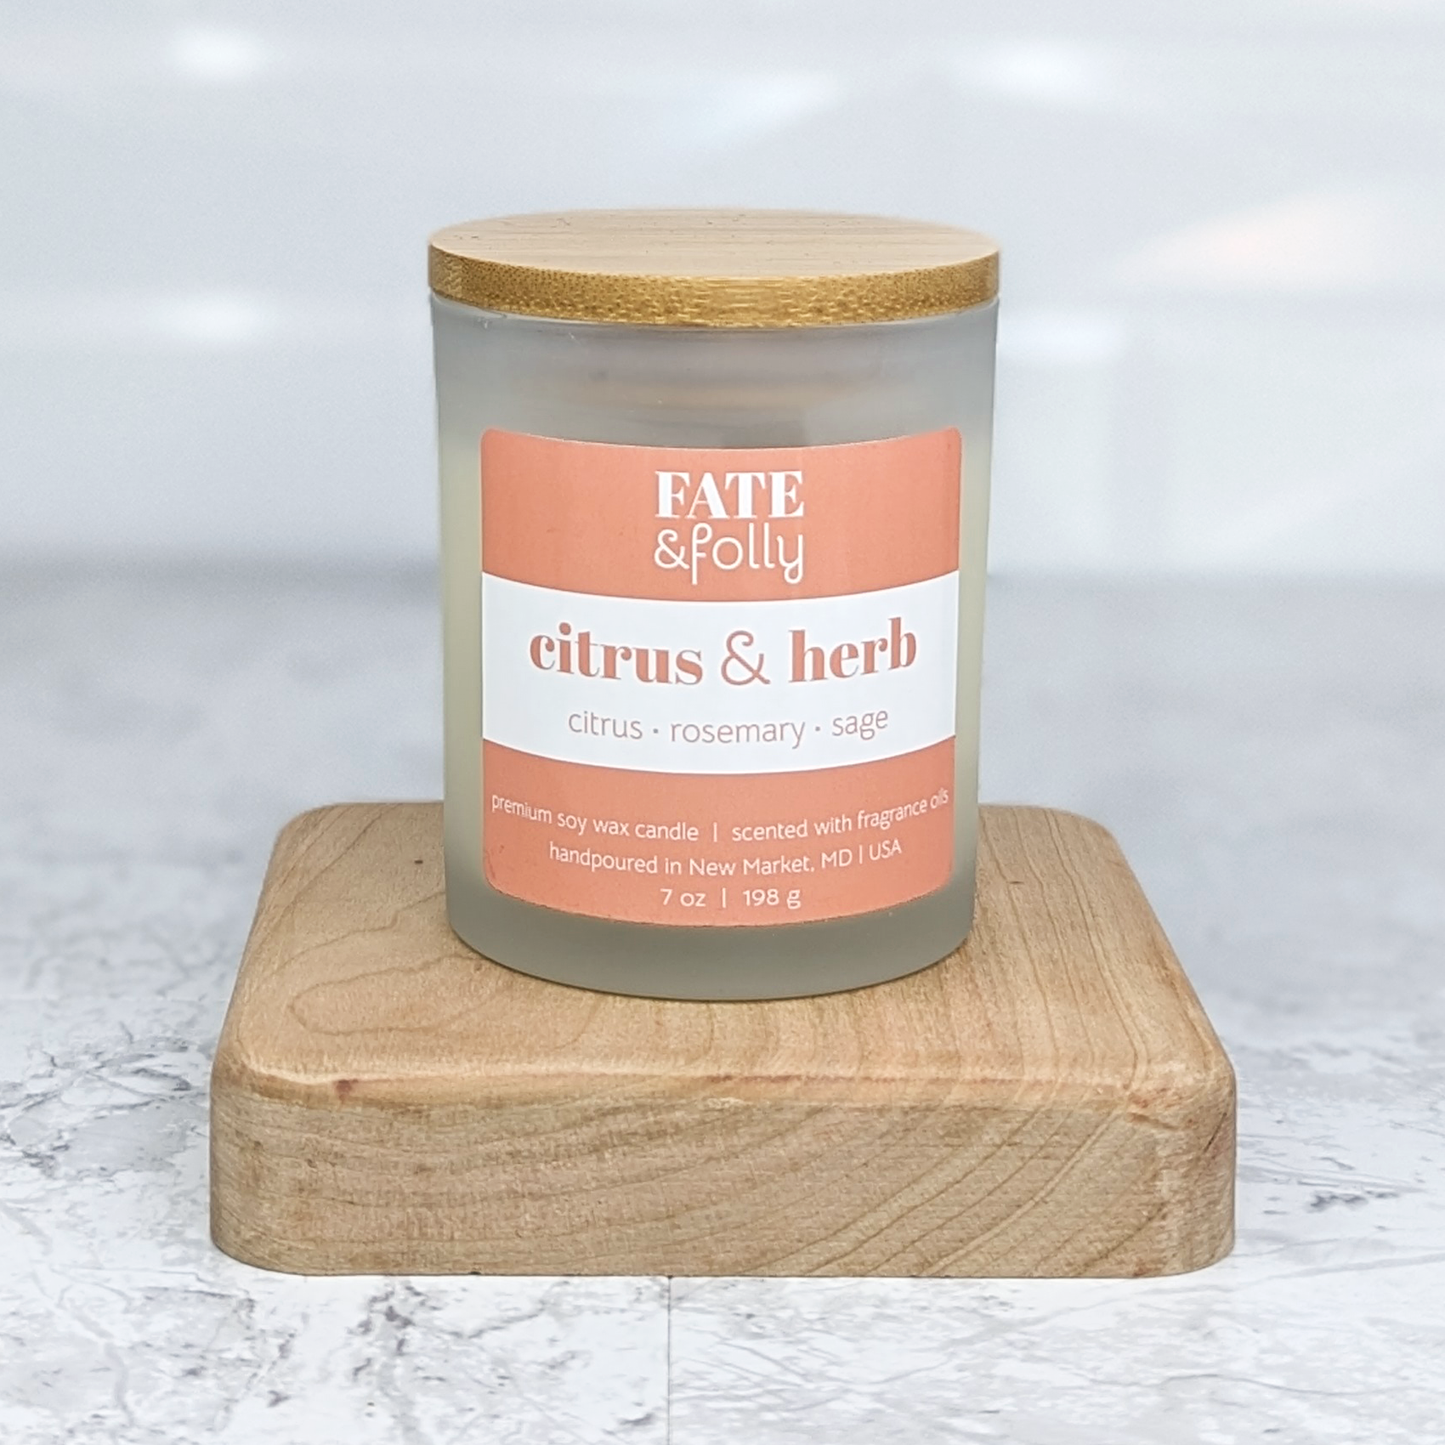 Premium Soy Wax Candle with Wood Wick - Citrus + Herb